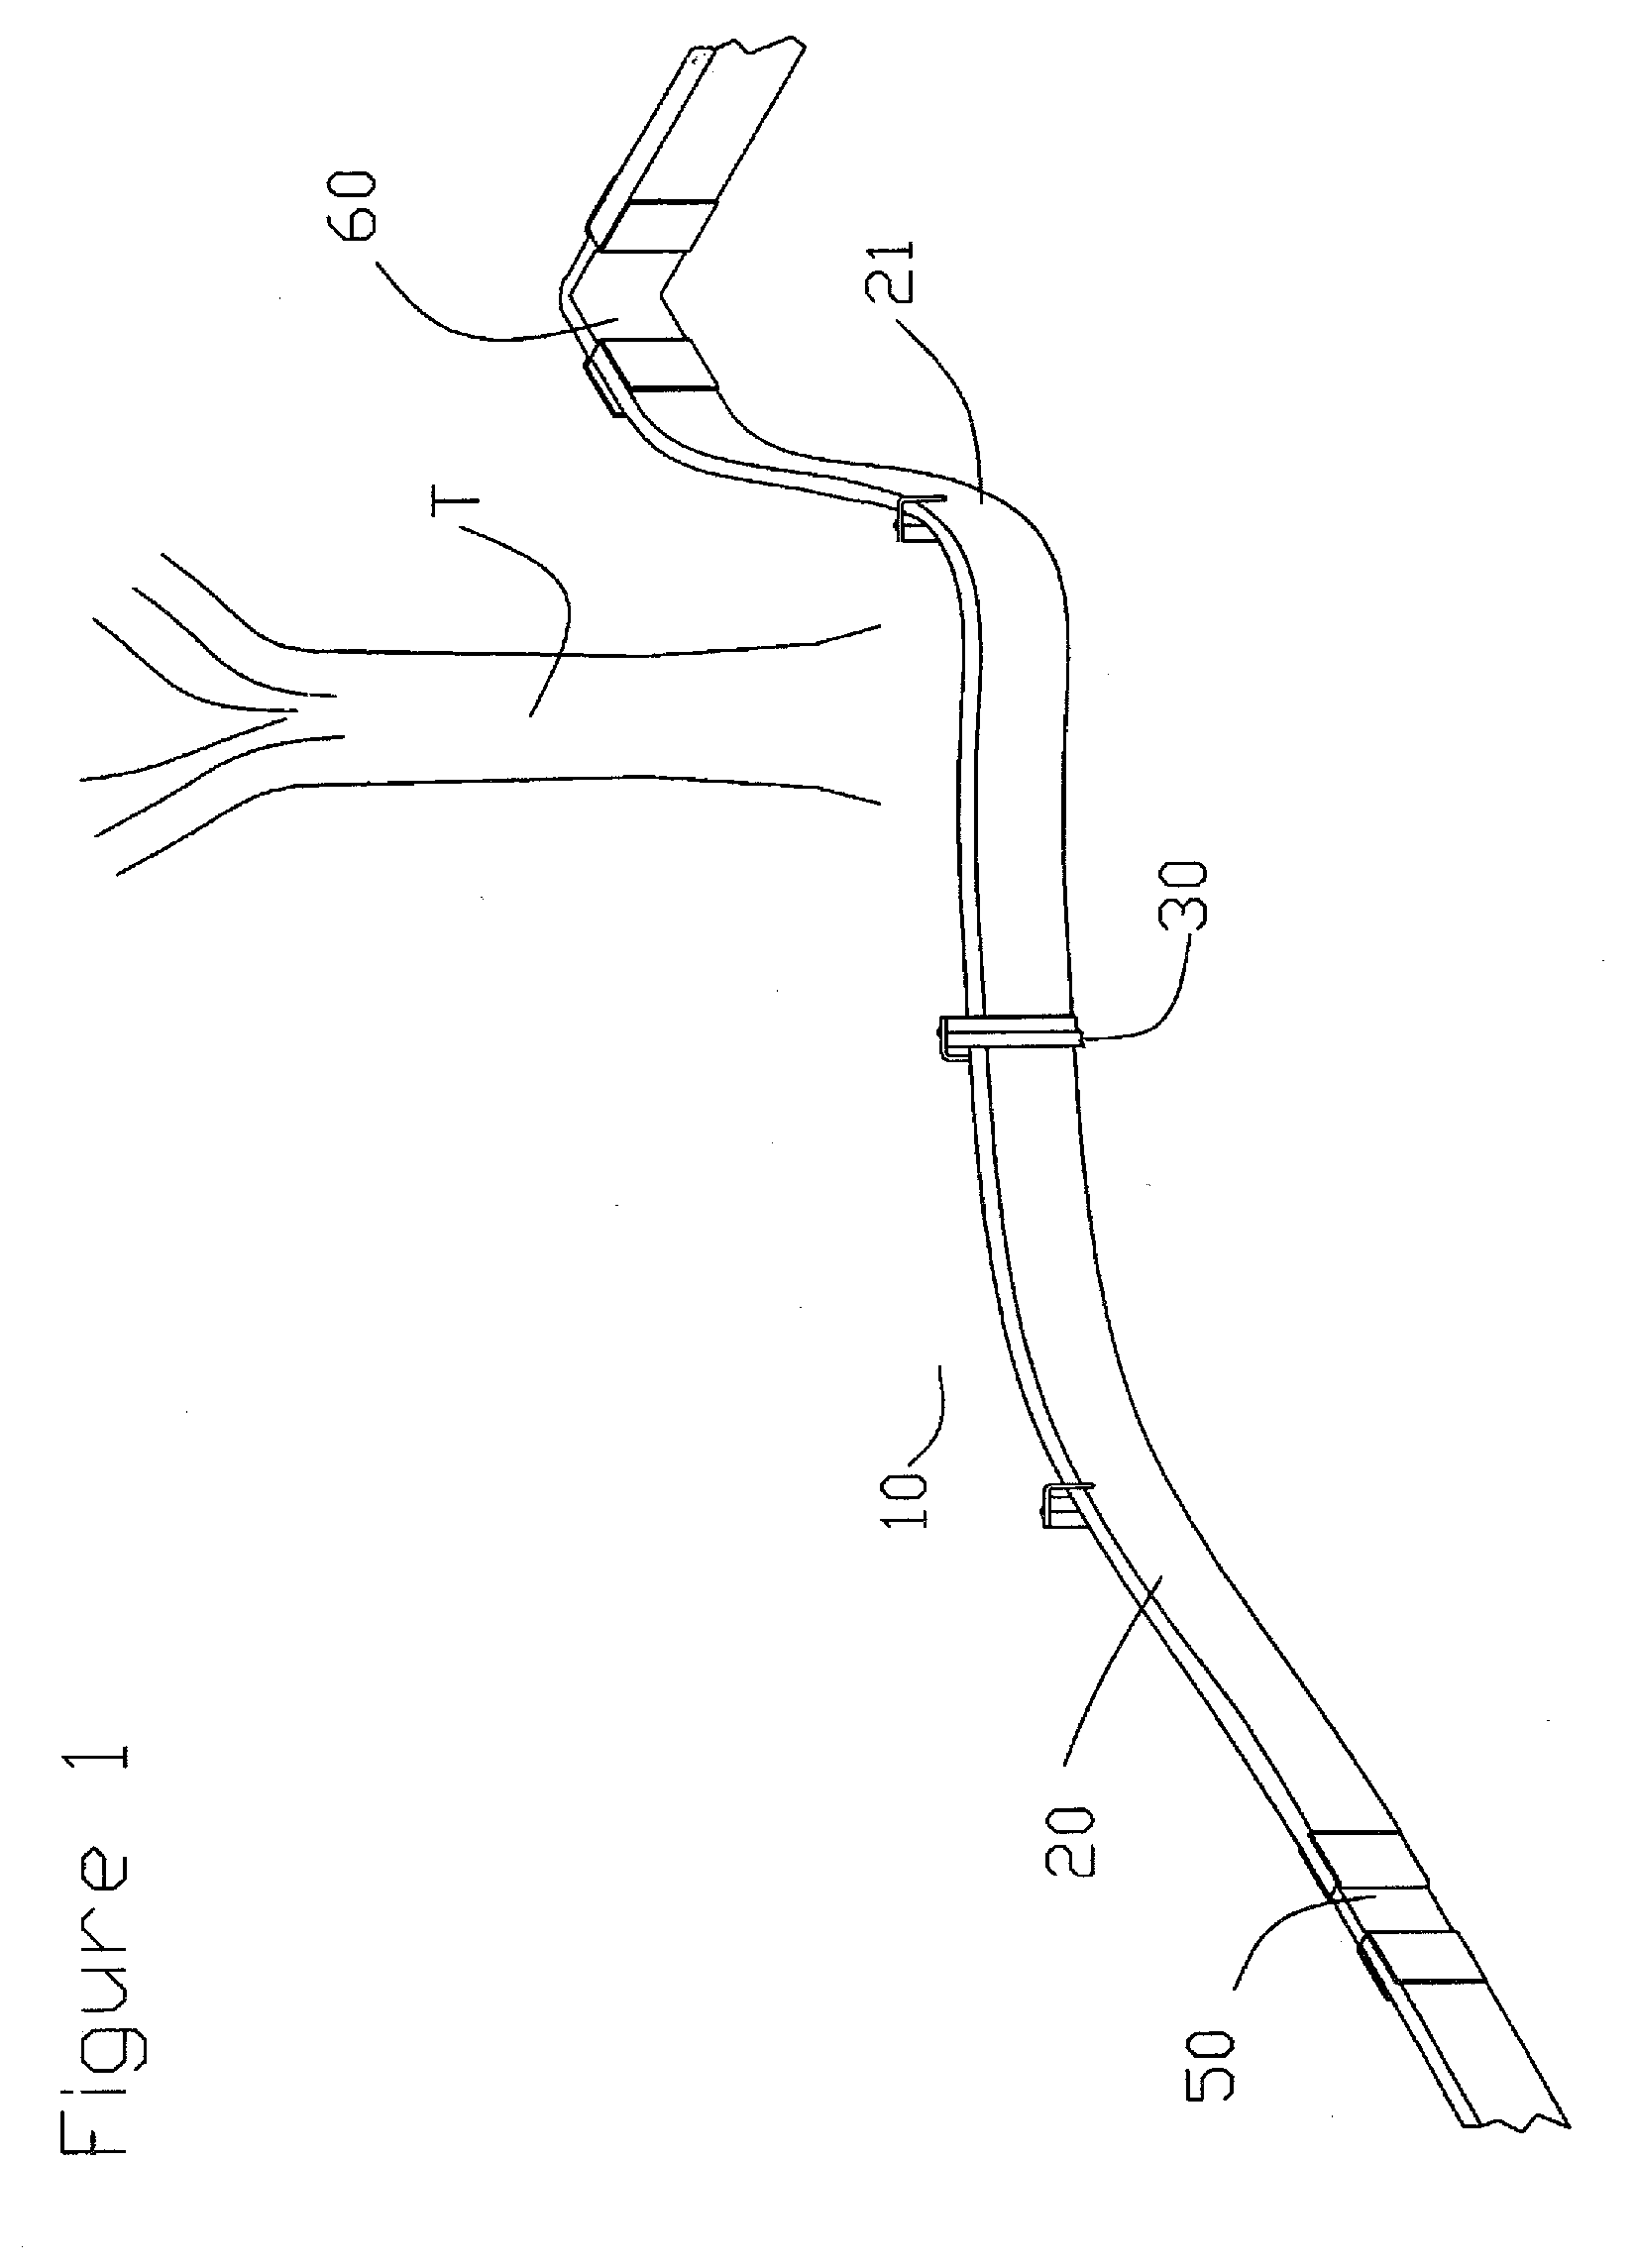 Lawn edging with integral electrical conductor and clip connectors